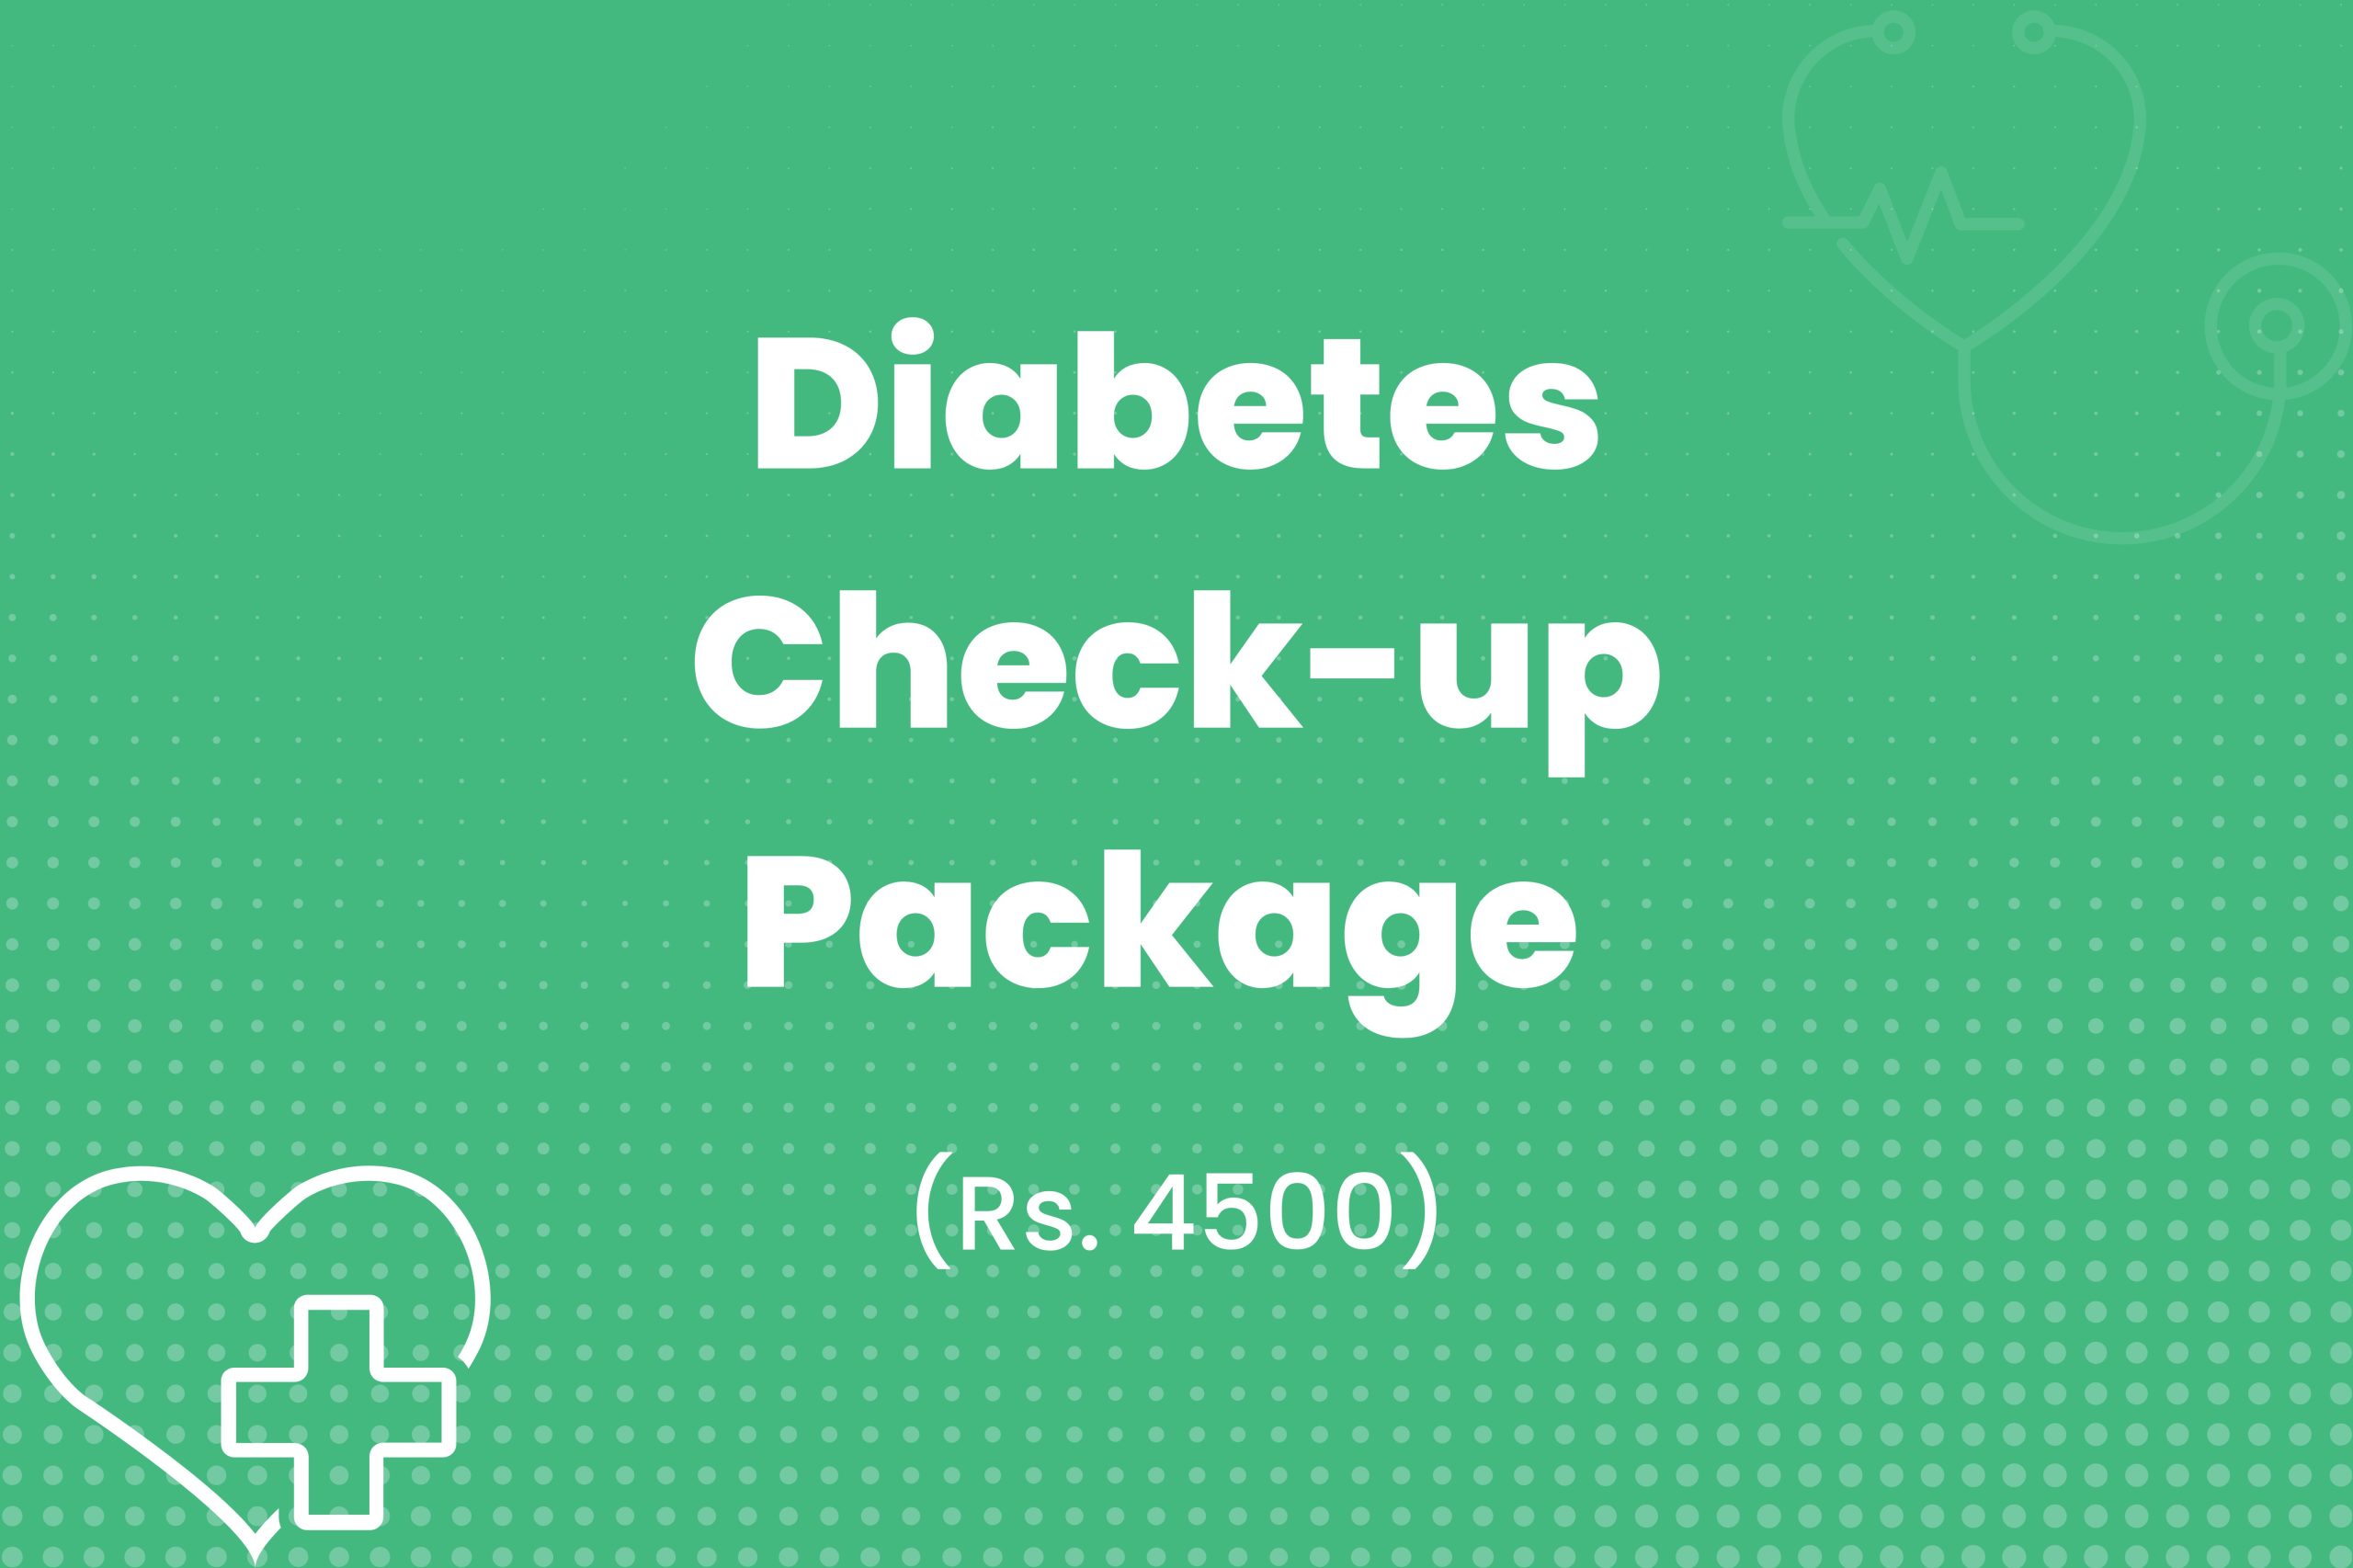 Diabetes Check-up Package